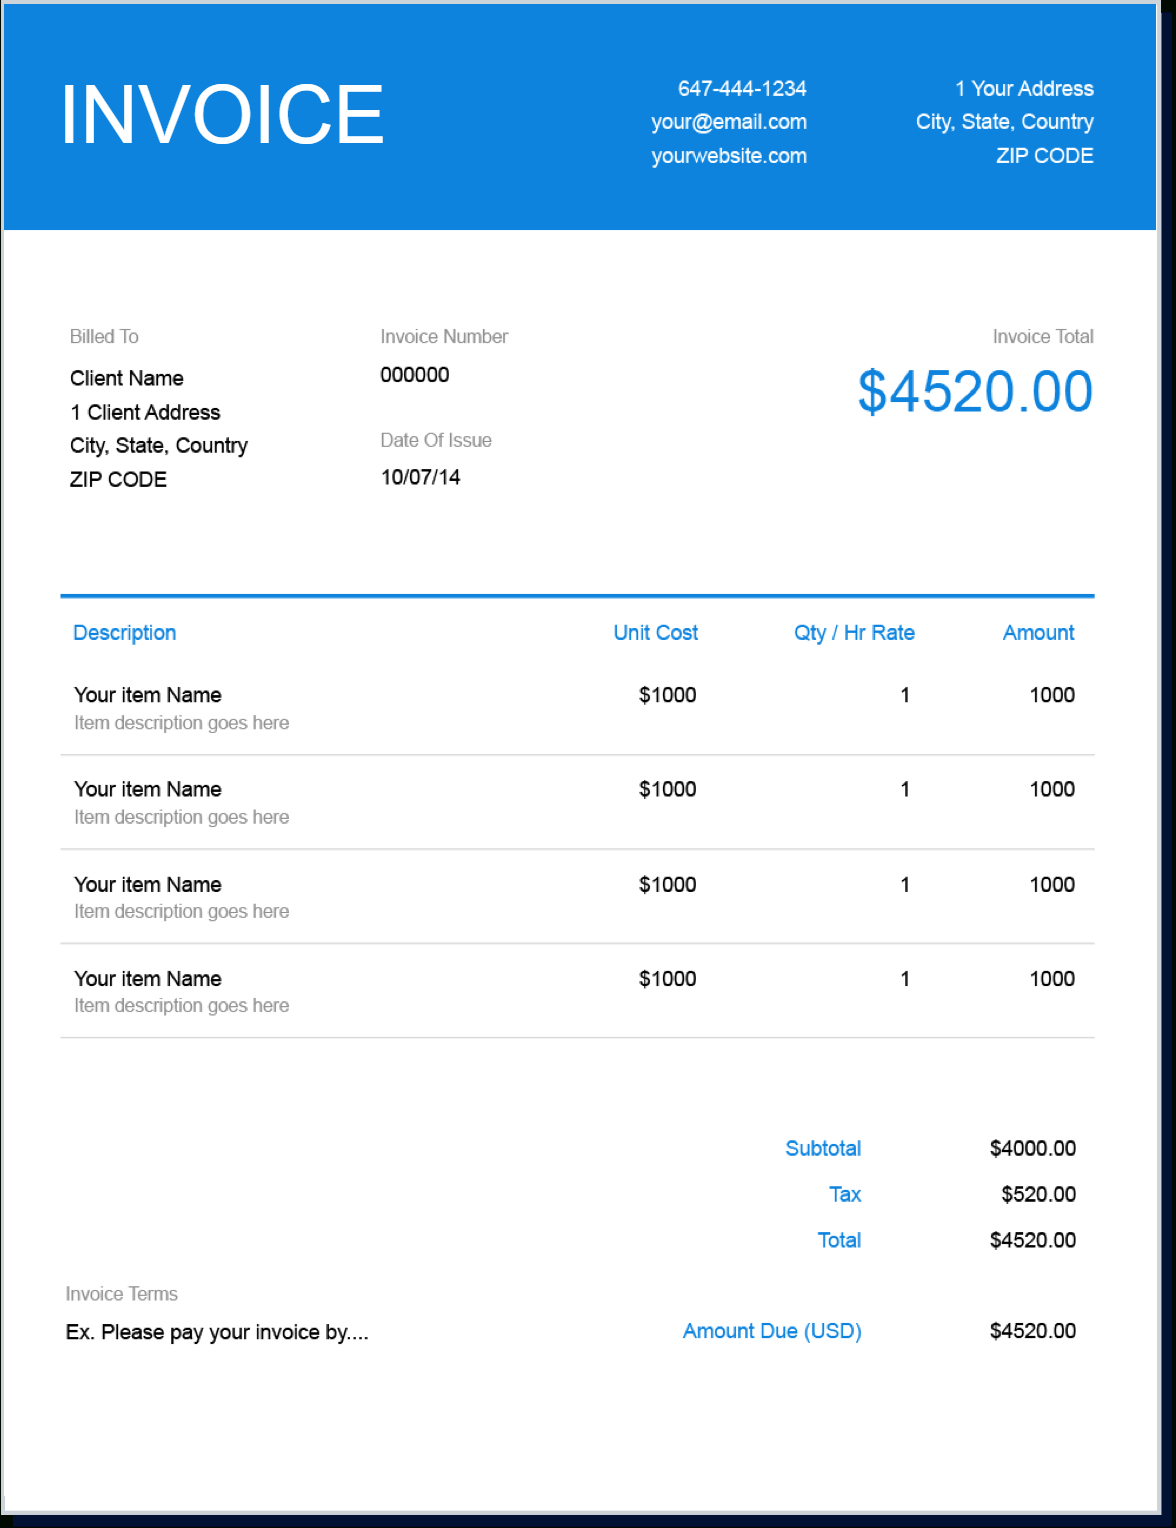 Invoice Template | Create And Send Free Invoices Instantly Within Web Design Invoice Template Word